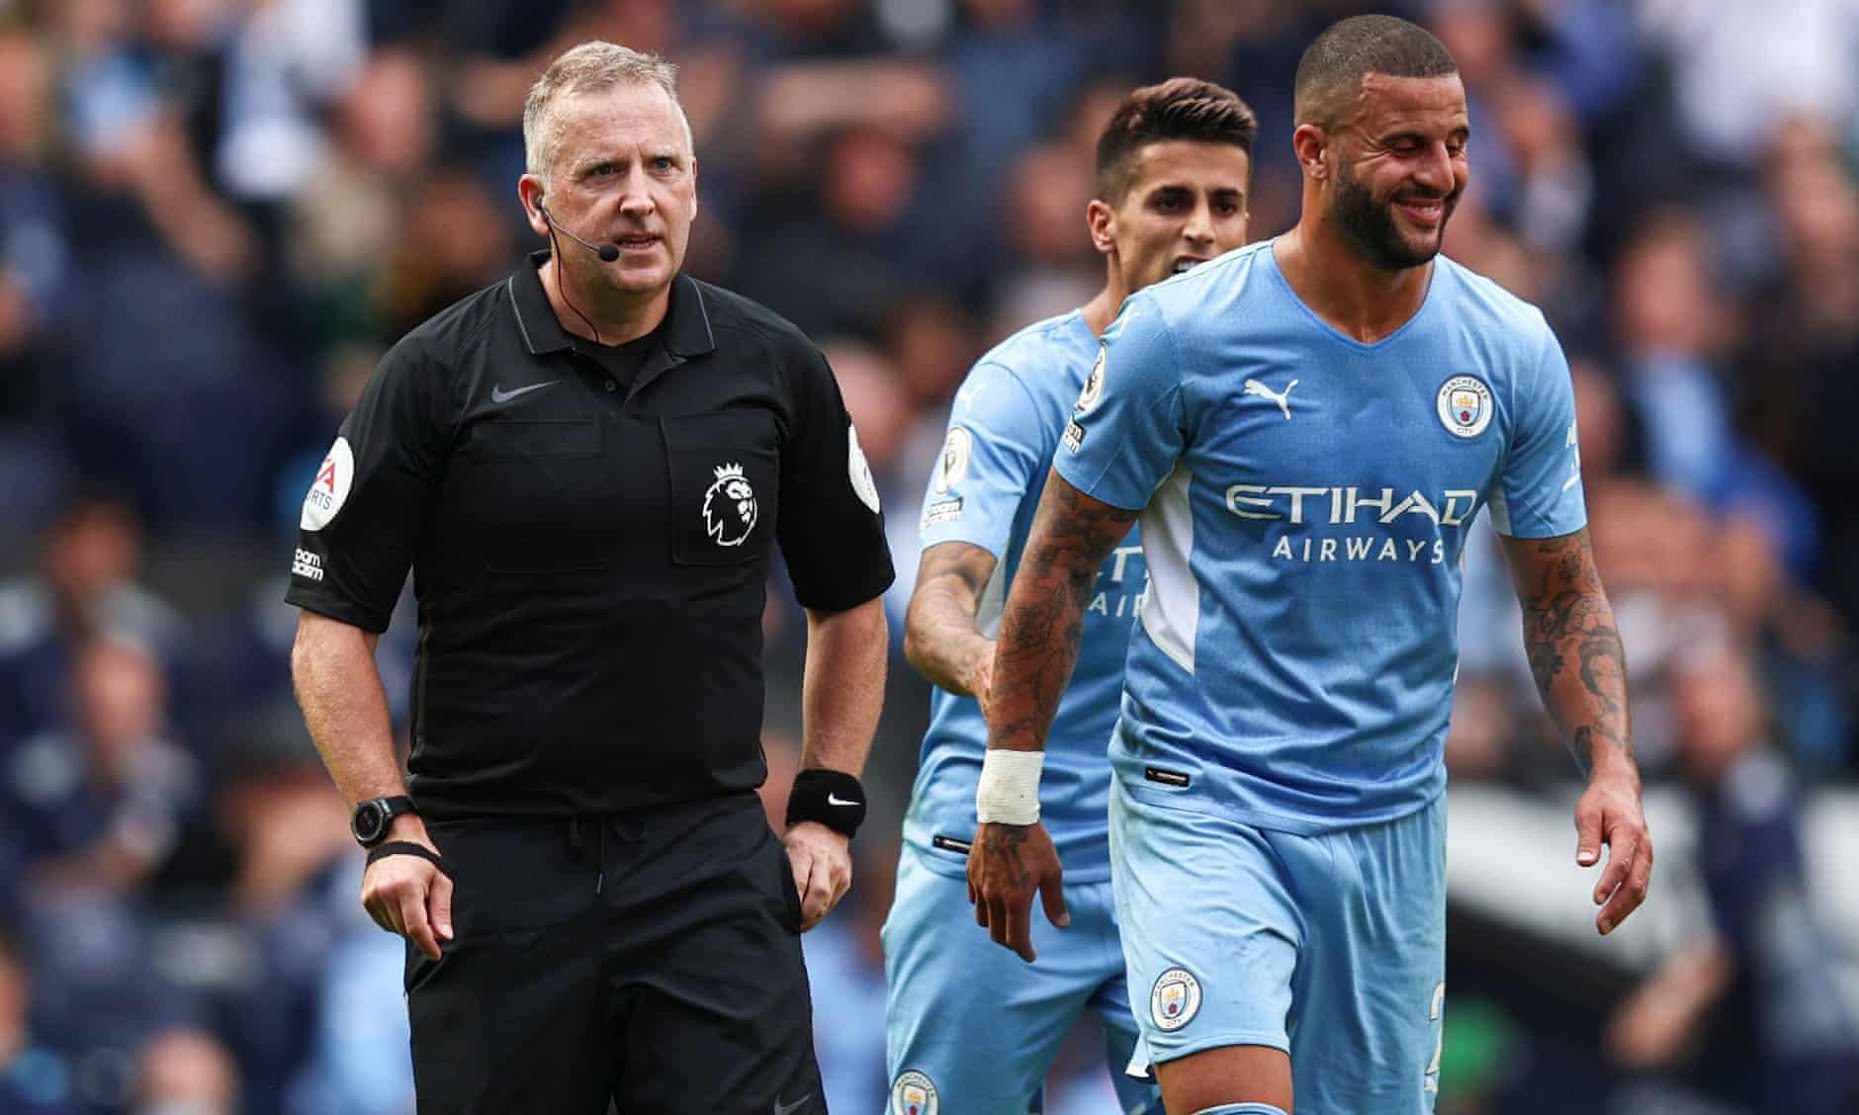 A VAR check spared Kyle Walker's blushes After overturning a penalty and a red card decision. | English Premier League